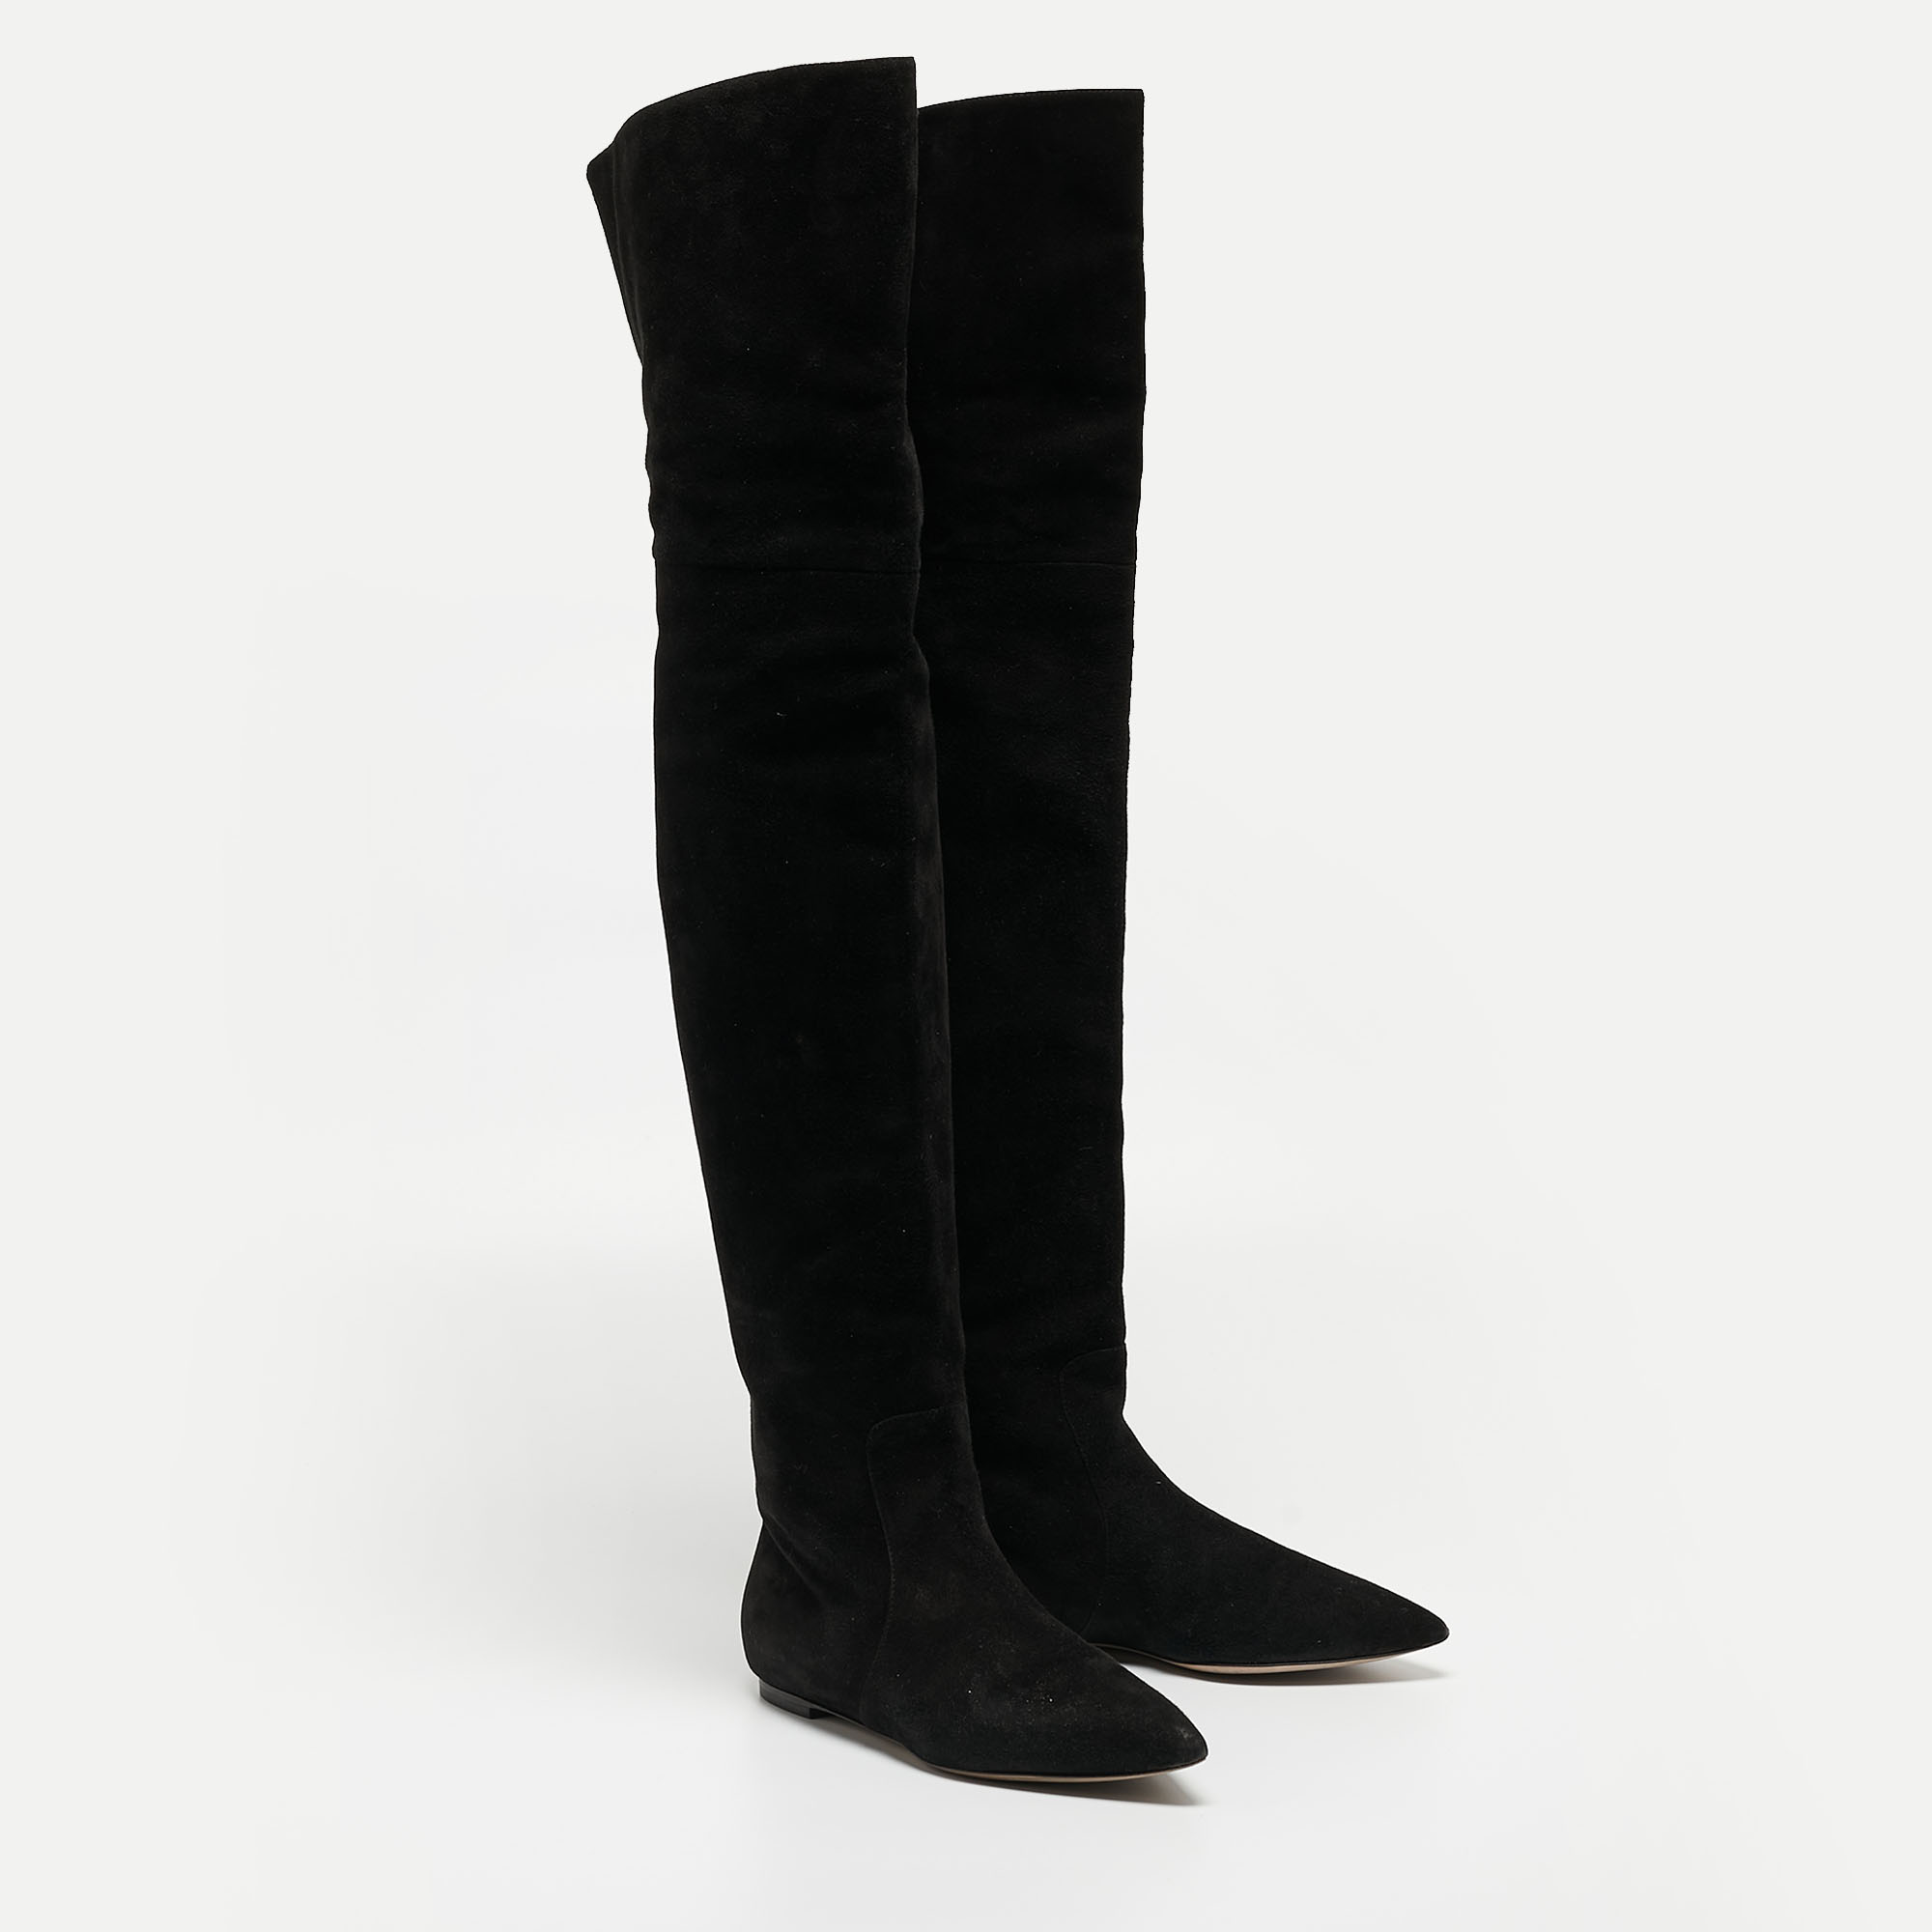 Dolce & Gabbana Black Suede Over The Knee Boots Size 37.5